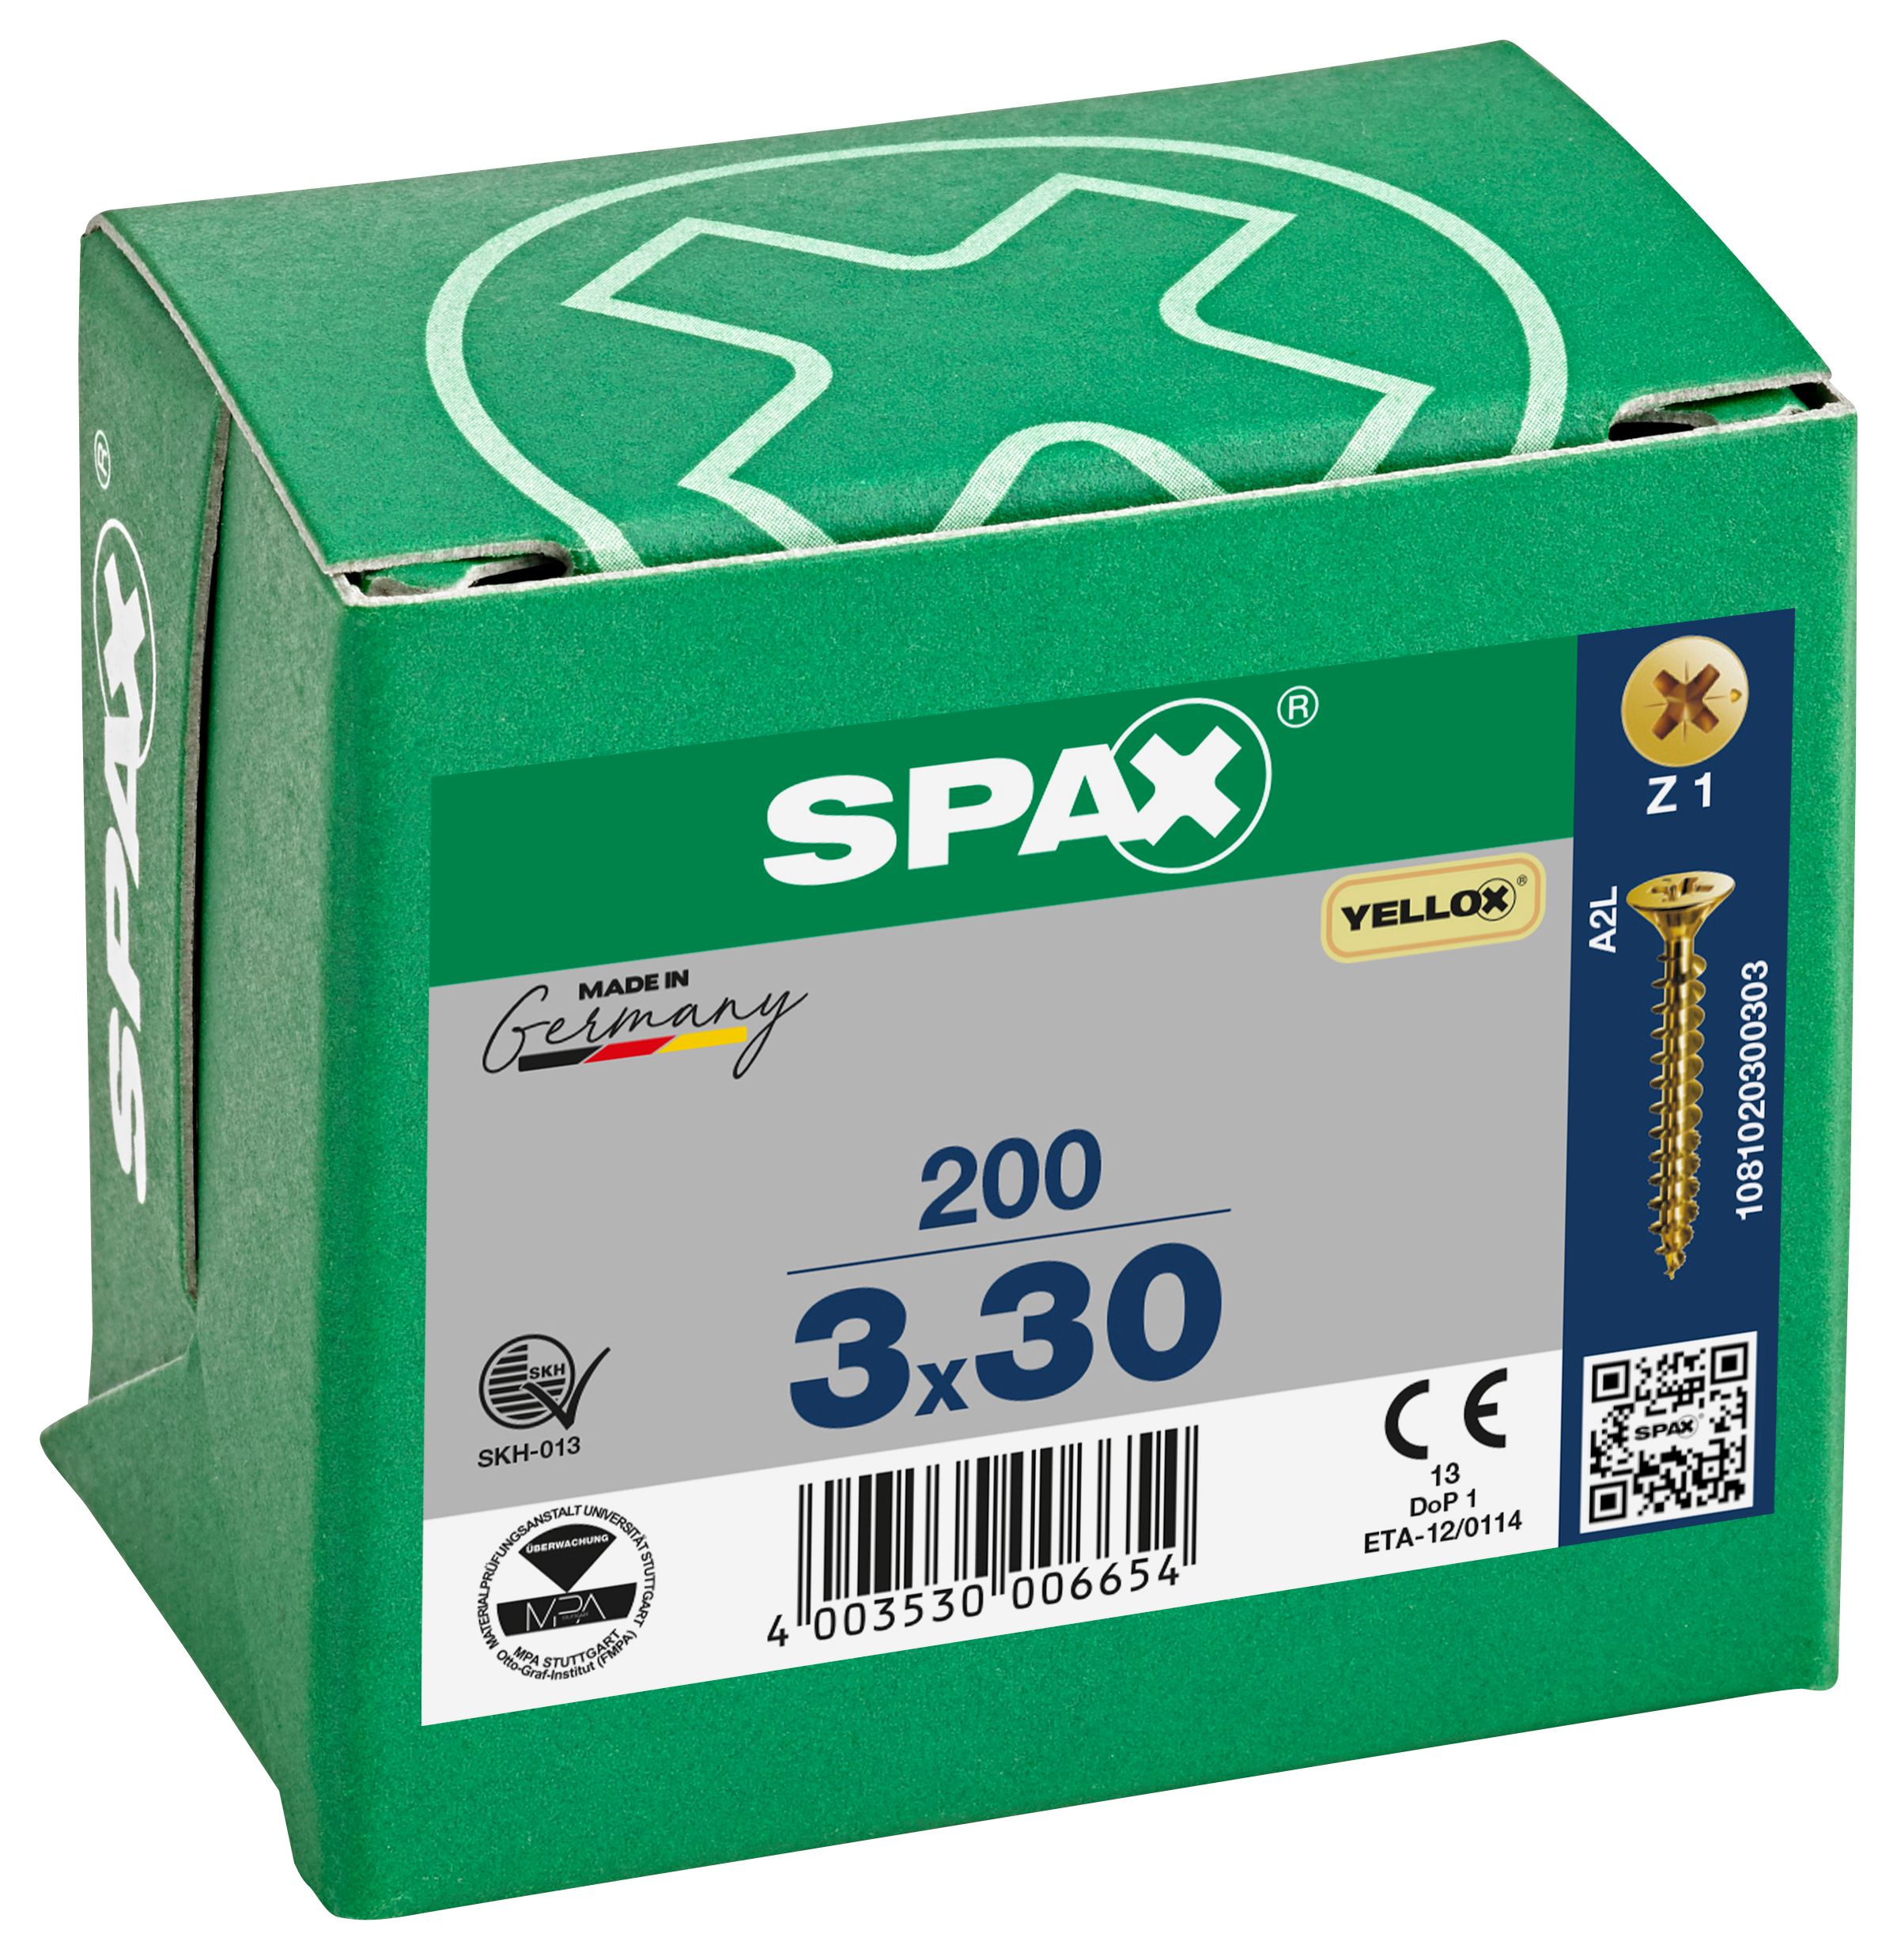 Image of Spax Pz Countersunk Yellox Screws - 3x30mm Pack Of 200